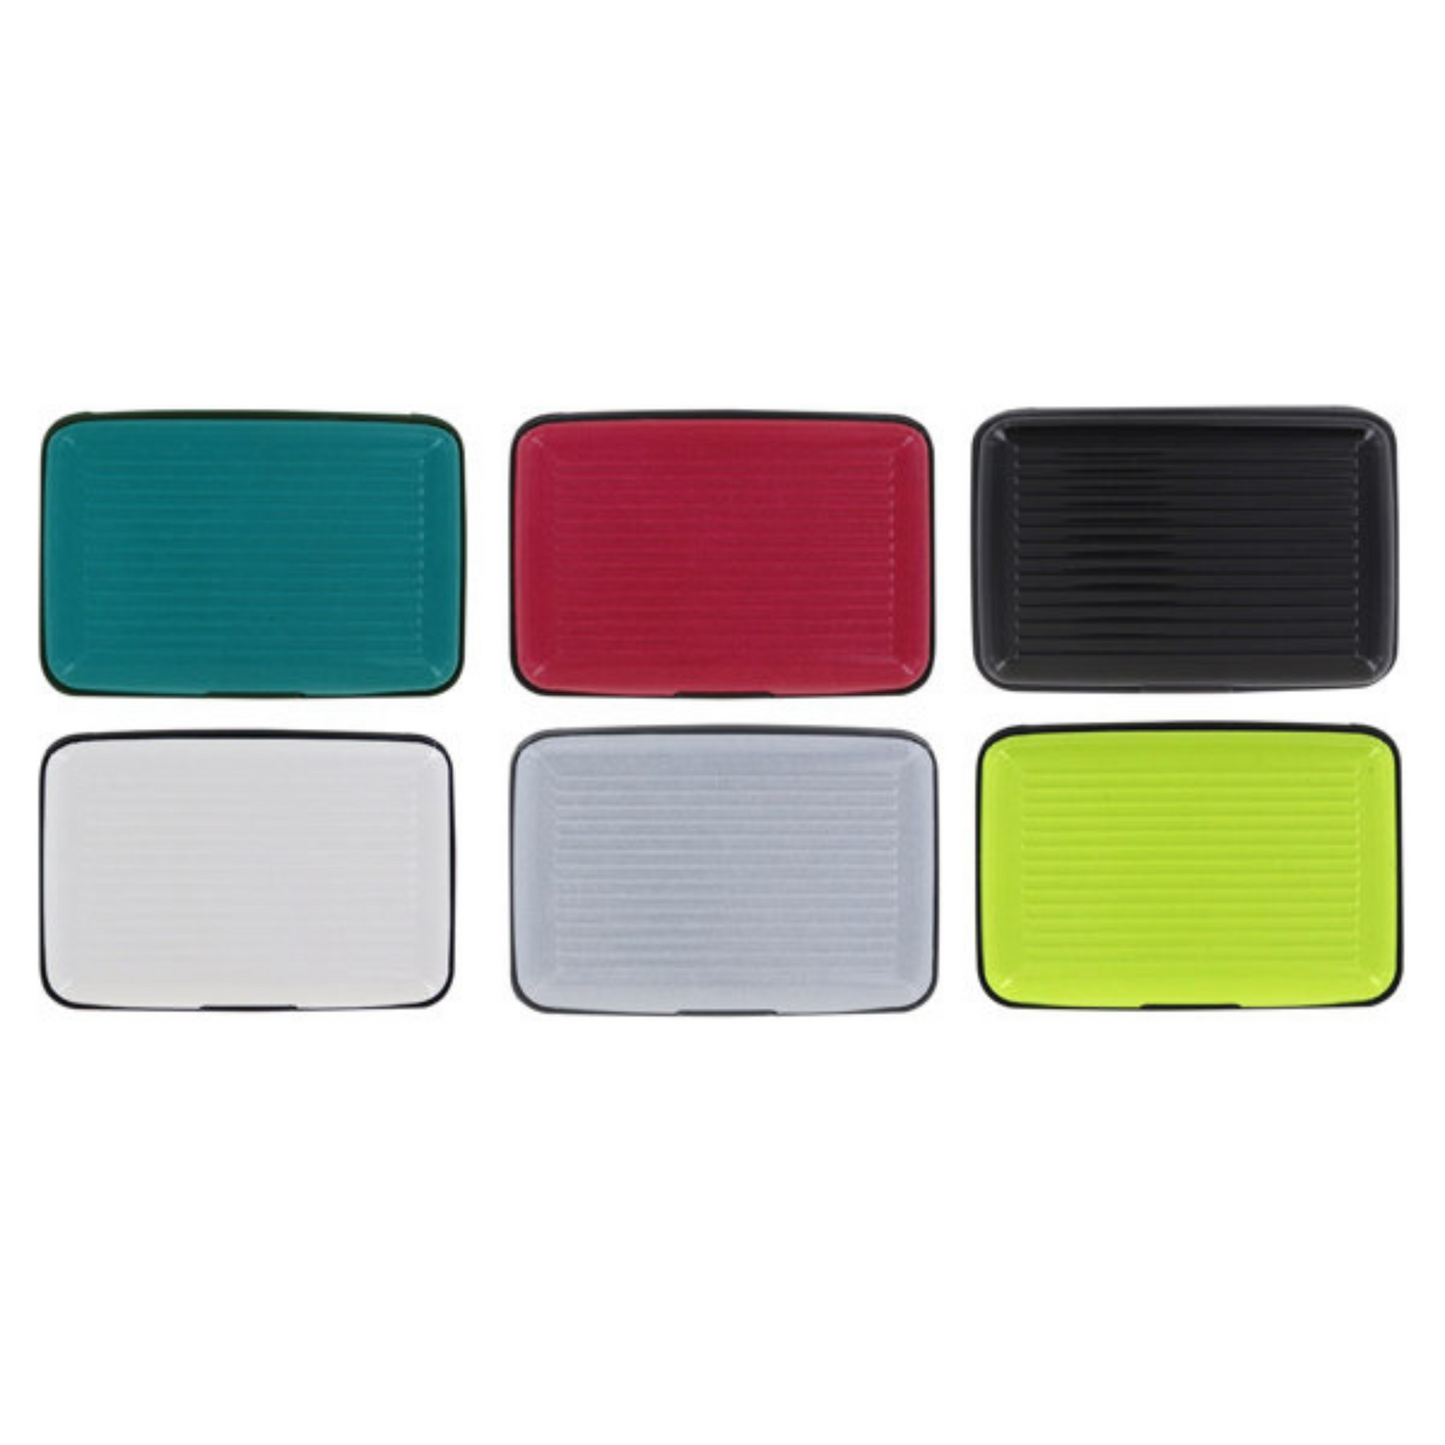 scan safe security wallet. Available in Teal, Burgundy, Black, Stone, Grey, and Lime